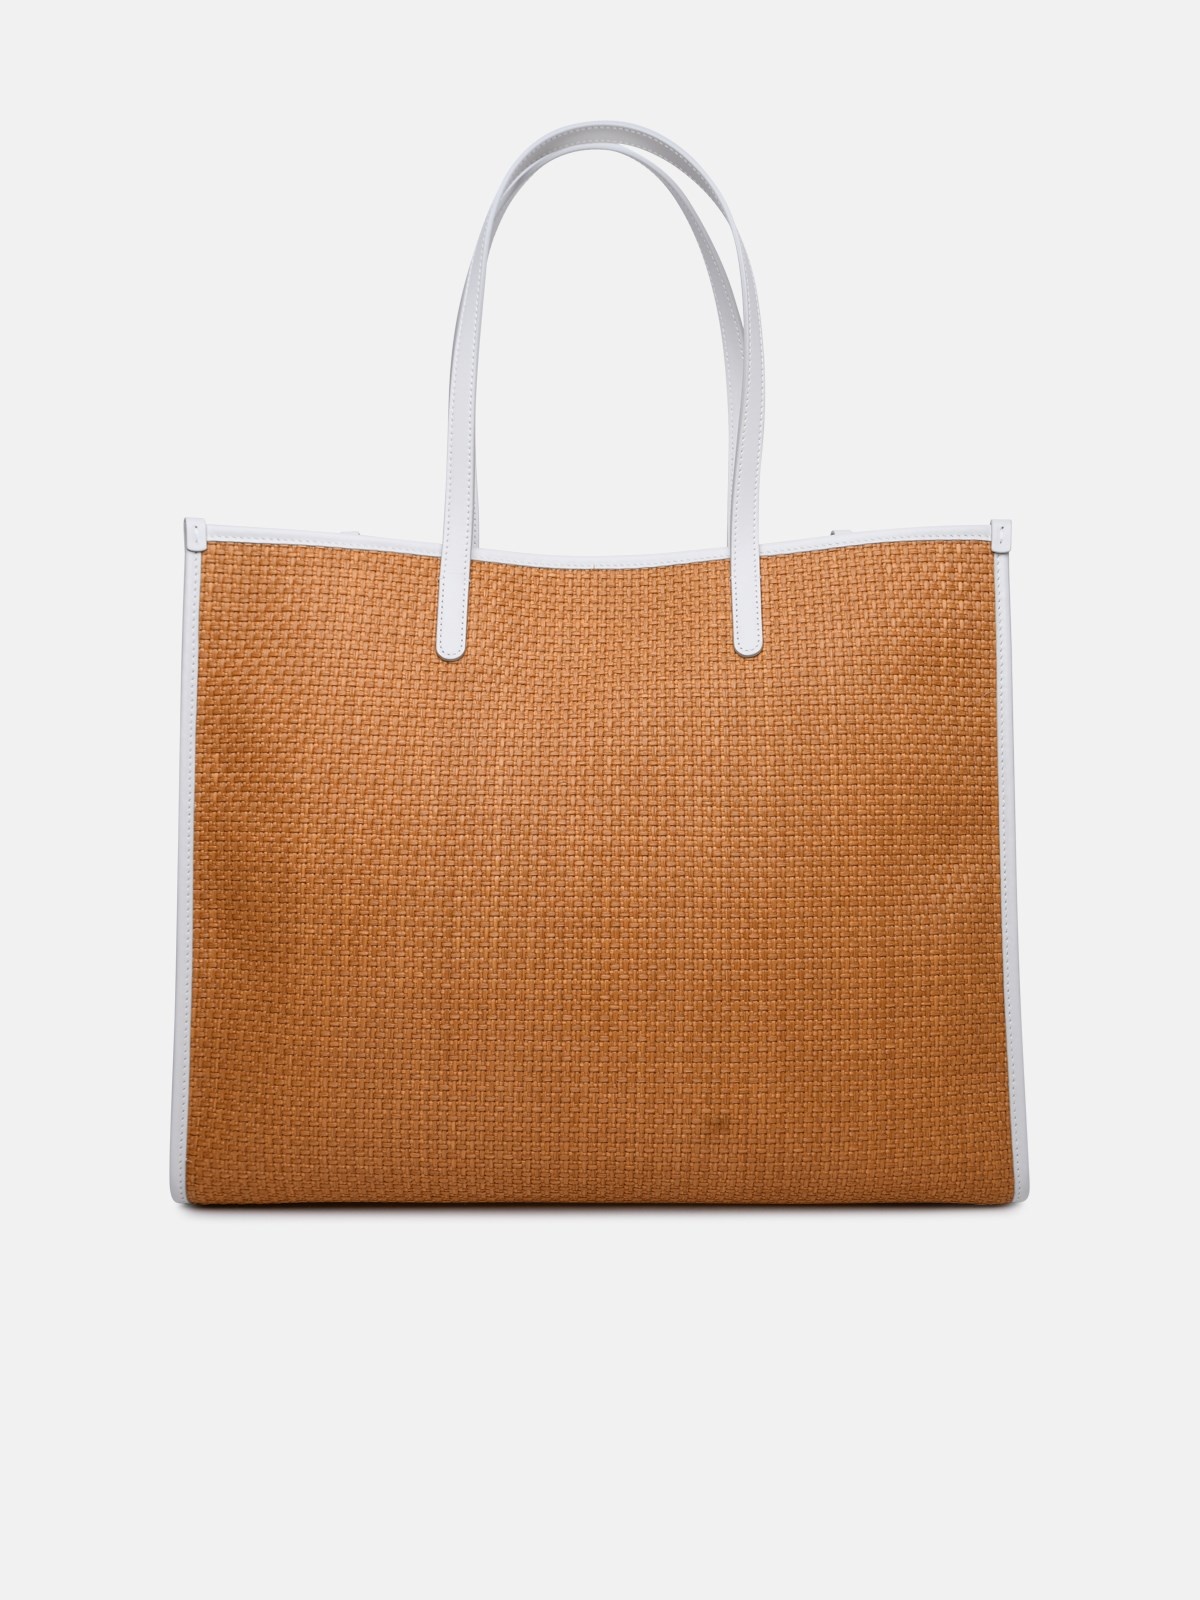 LARGE SHOPPING BAG IN BEIGE COTTON BLEND - 3